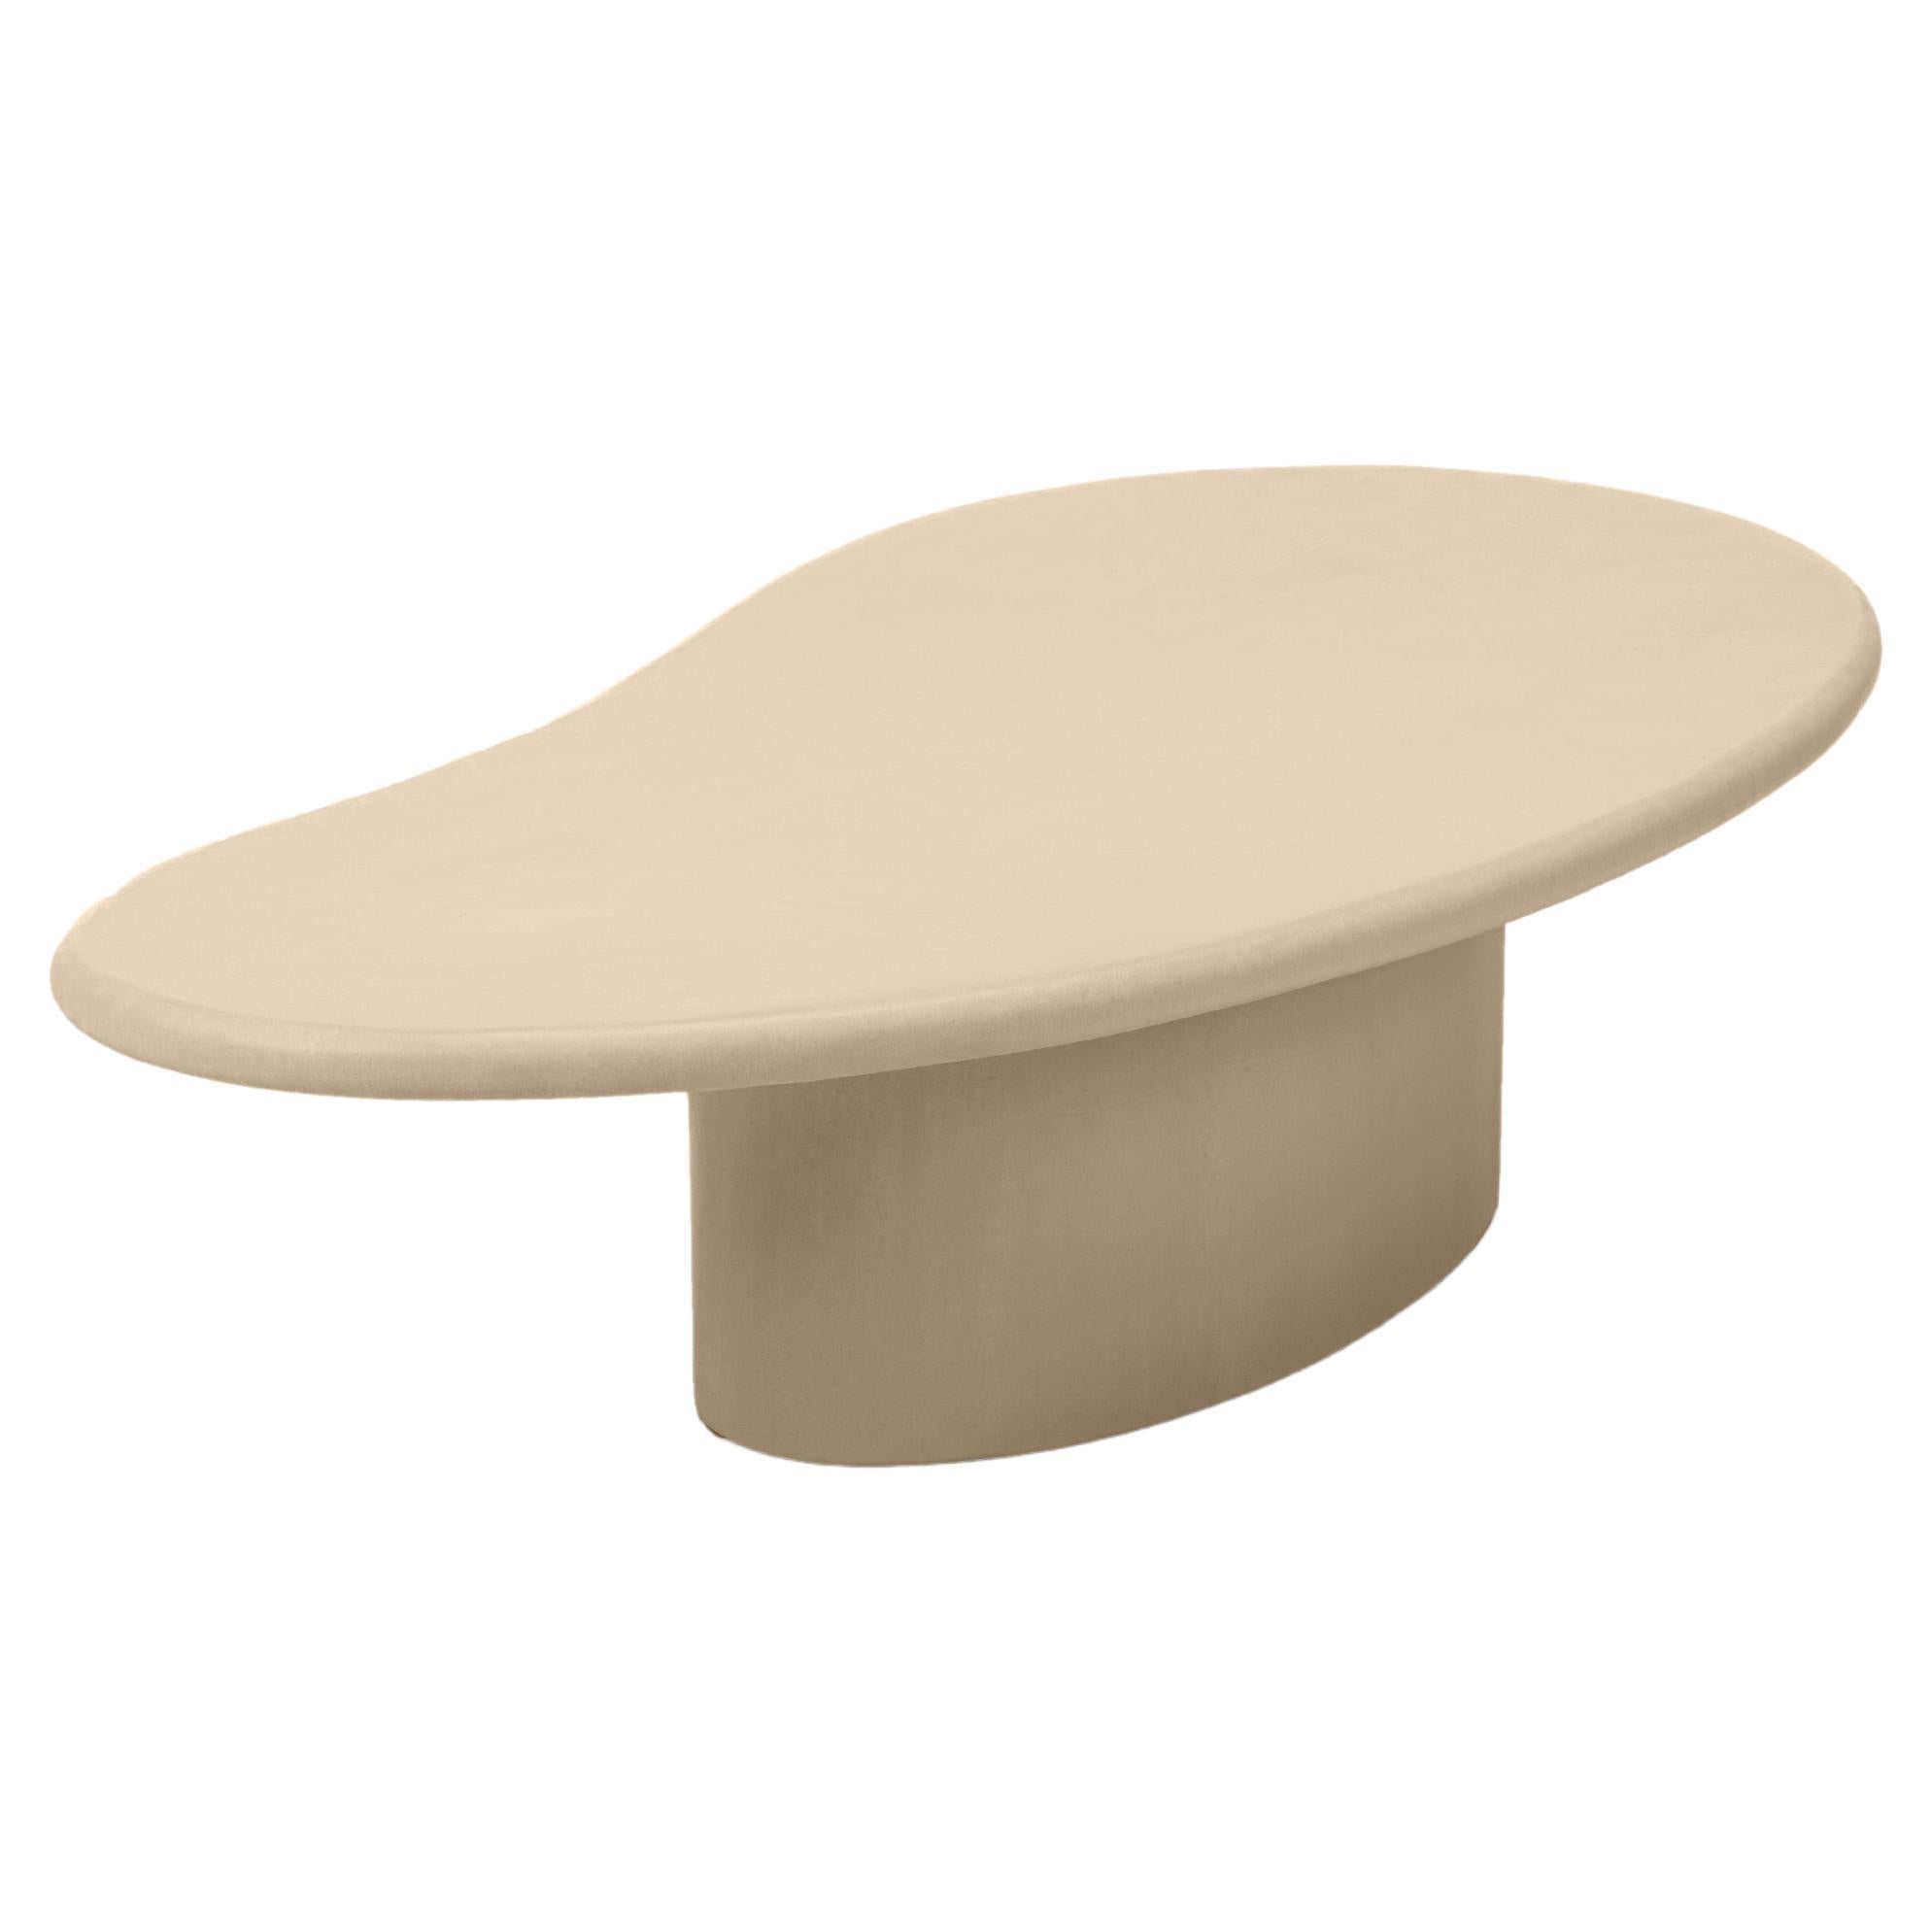 Organic Shaped Natural Plaster Coffee Table "Angus" 150 by Isabelle Beaumont For Sale